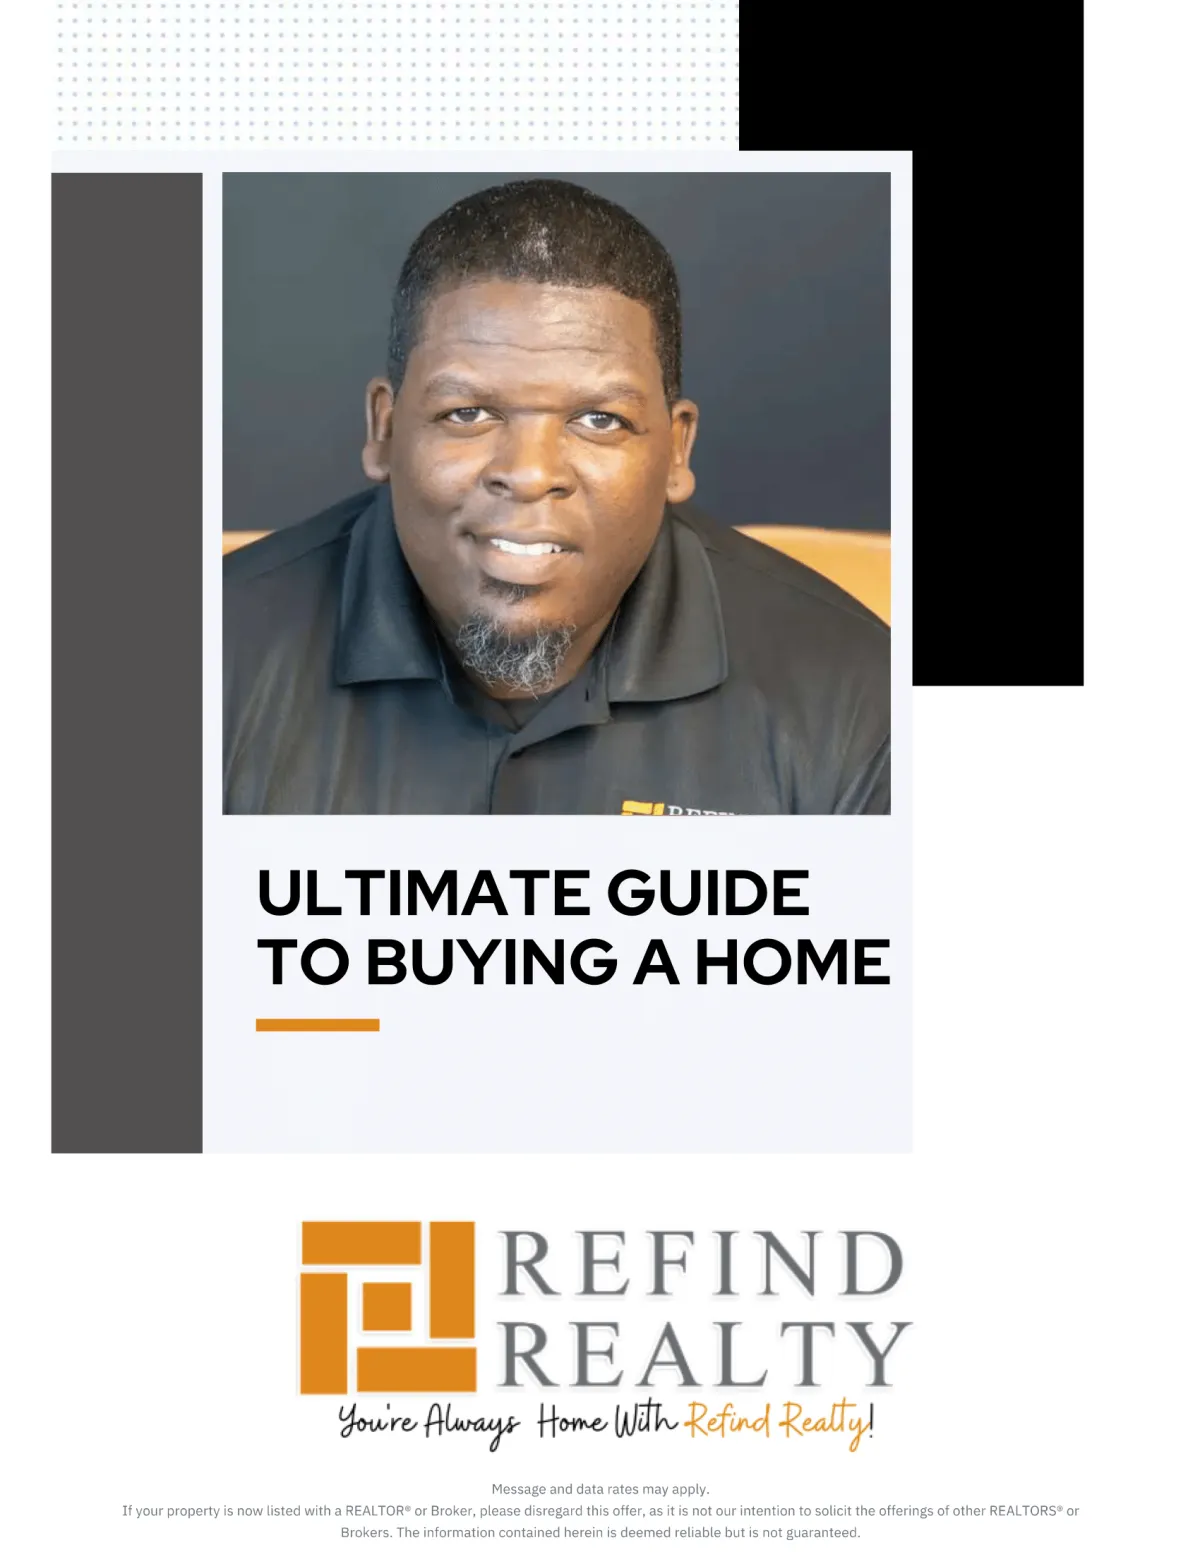 Ultimate Guide To Buying a Home